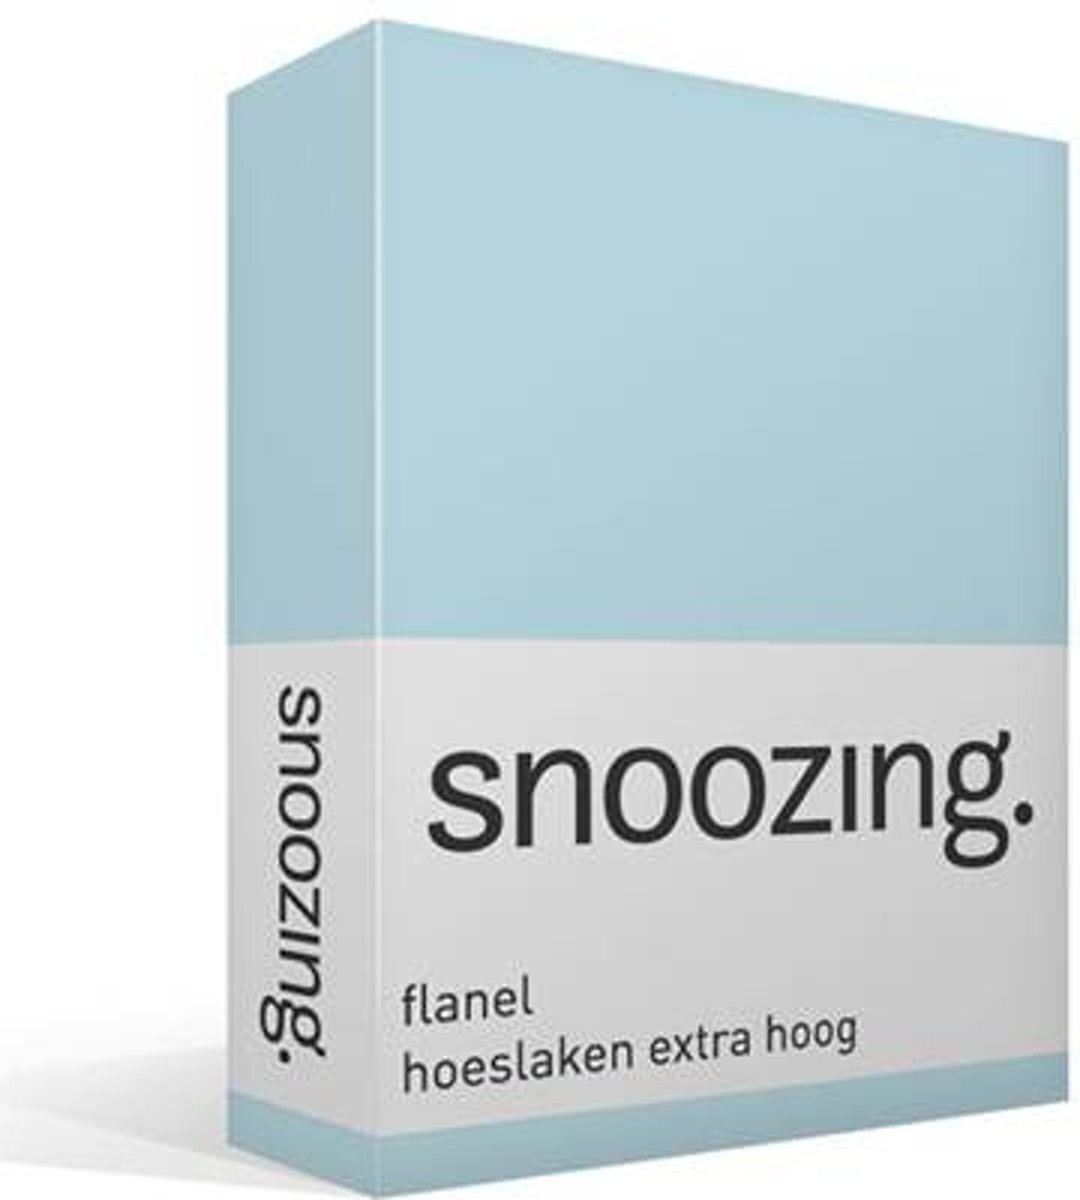 Snoozing flanel hoeslaken extra hoog - 1-persoons (70x200 cm) - 100%